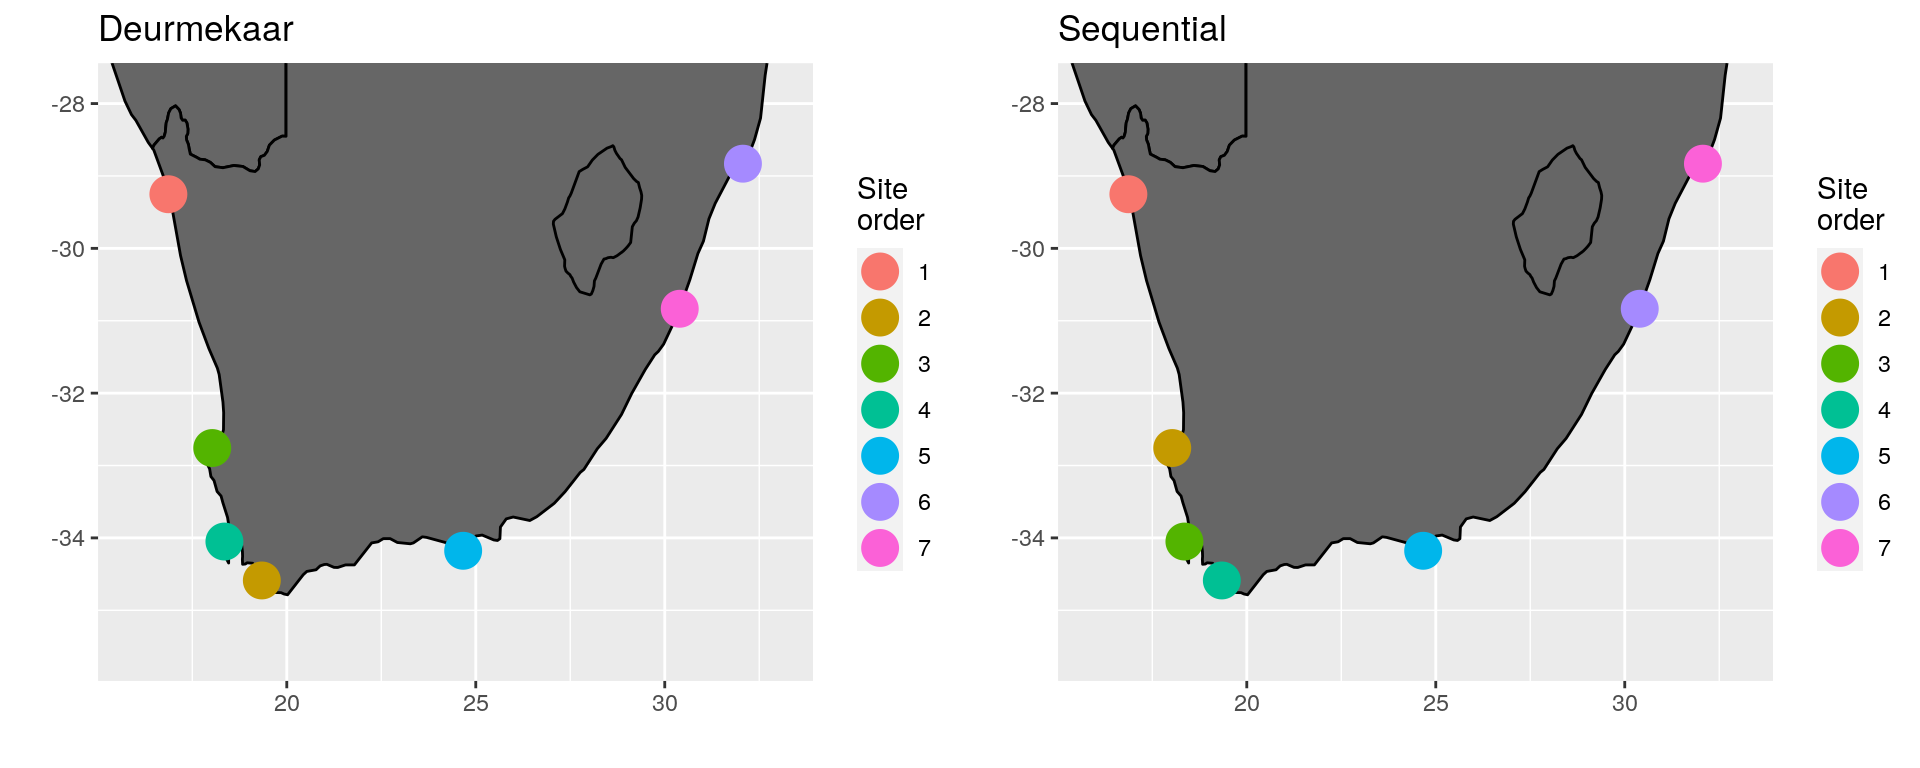 Comparison of site ordering around South Africa.